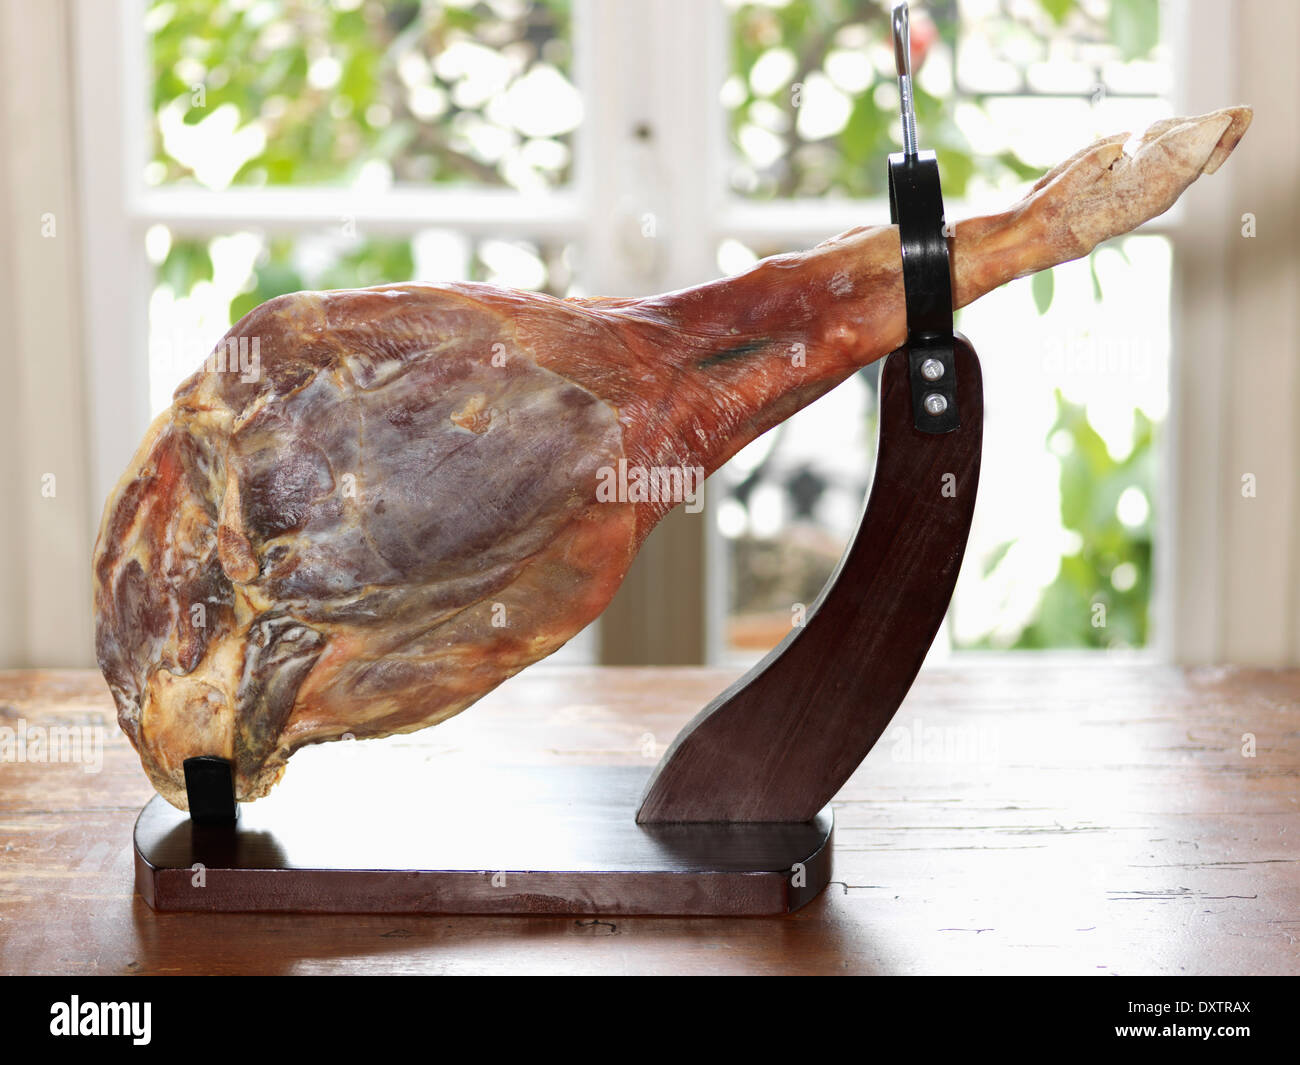 Serrano ham on a carving stand Stock Photo: 68157346 - Alamy